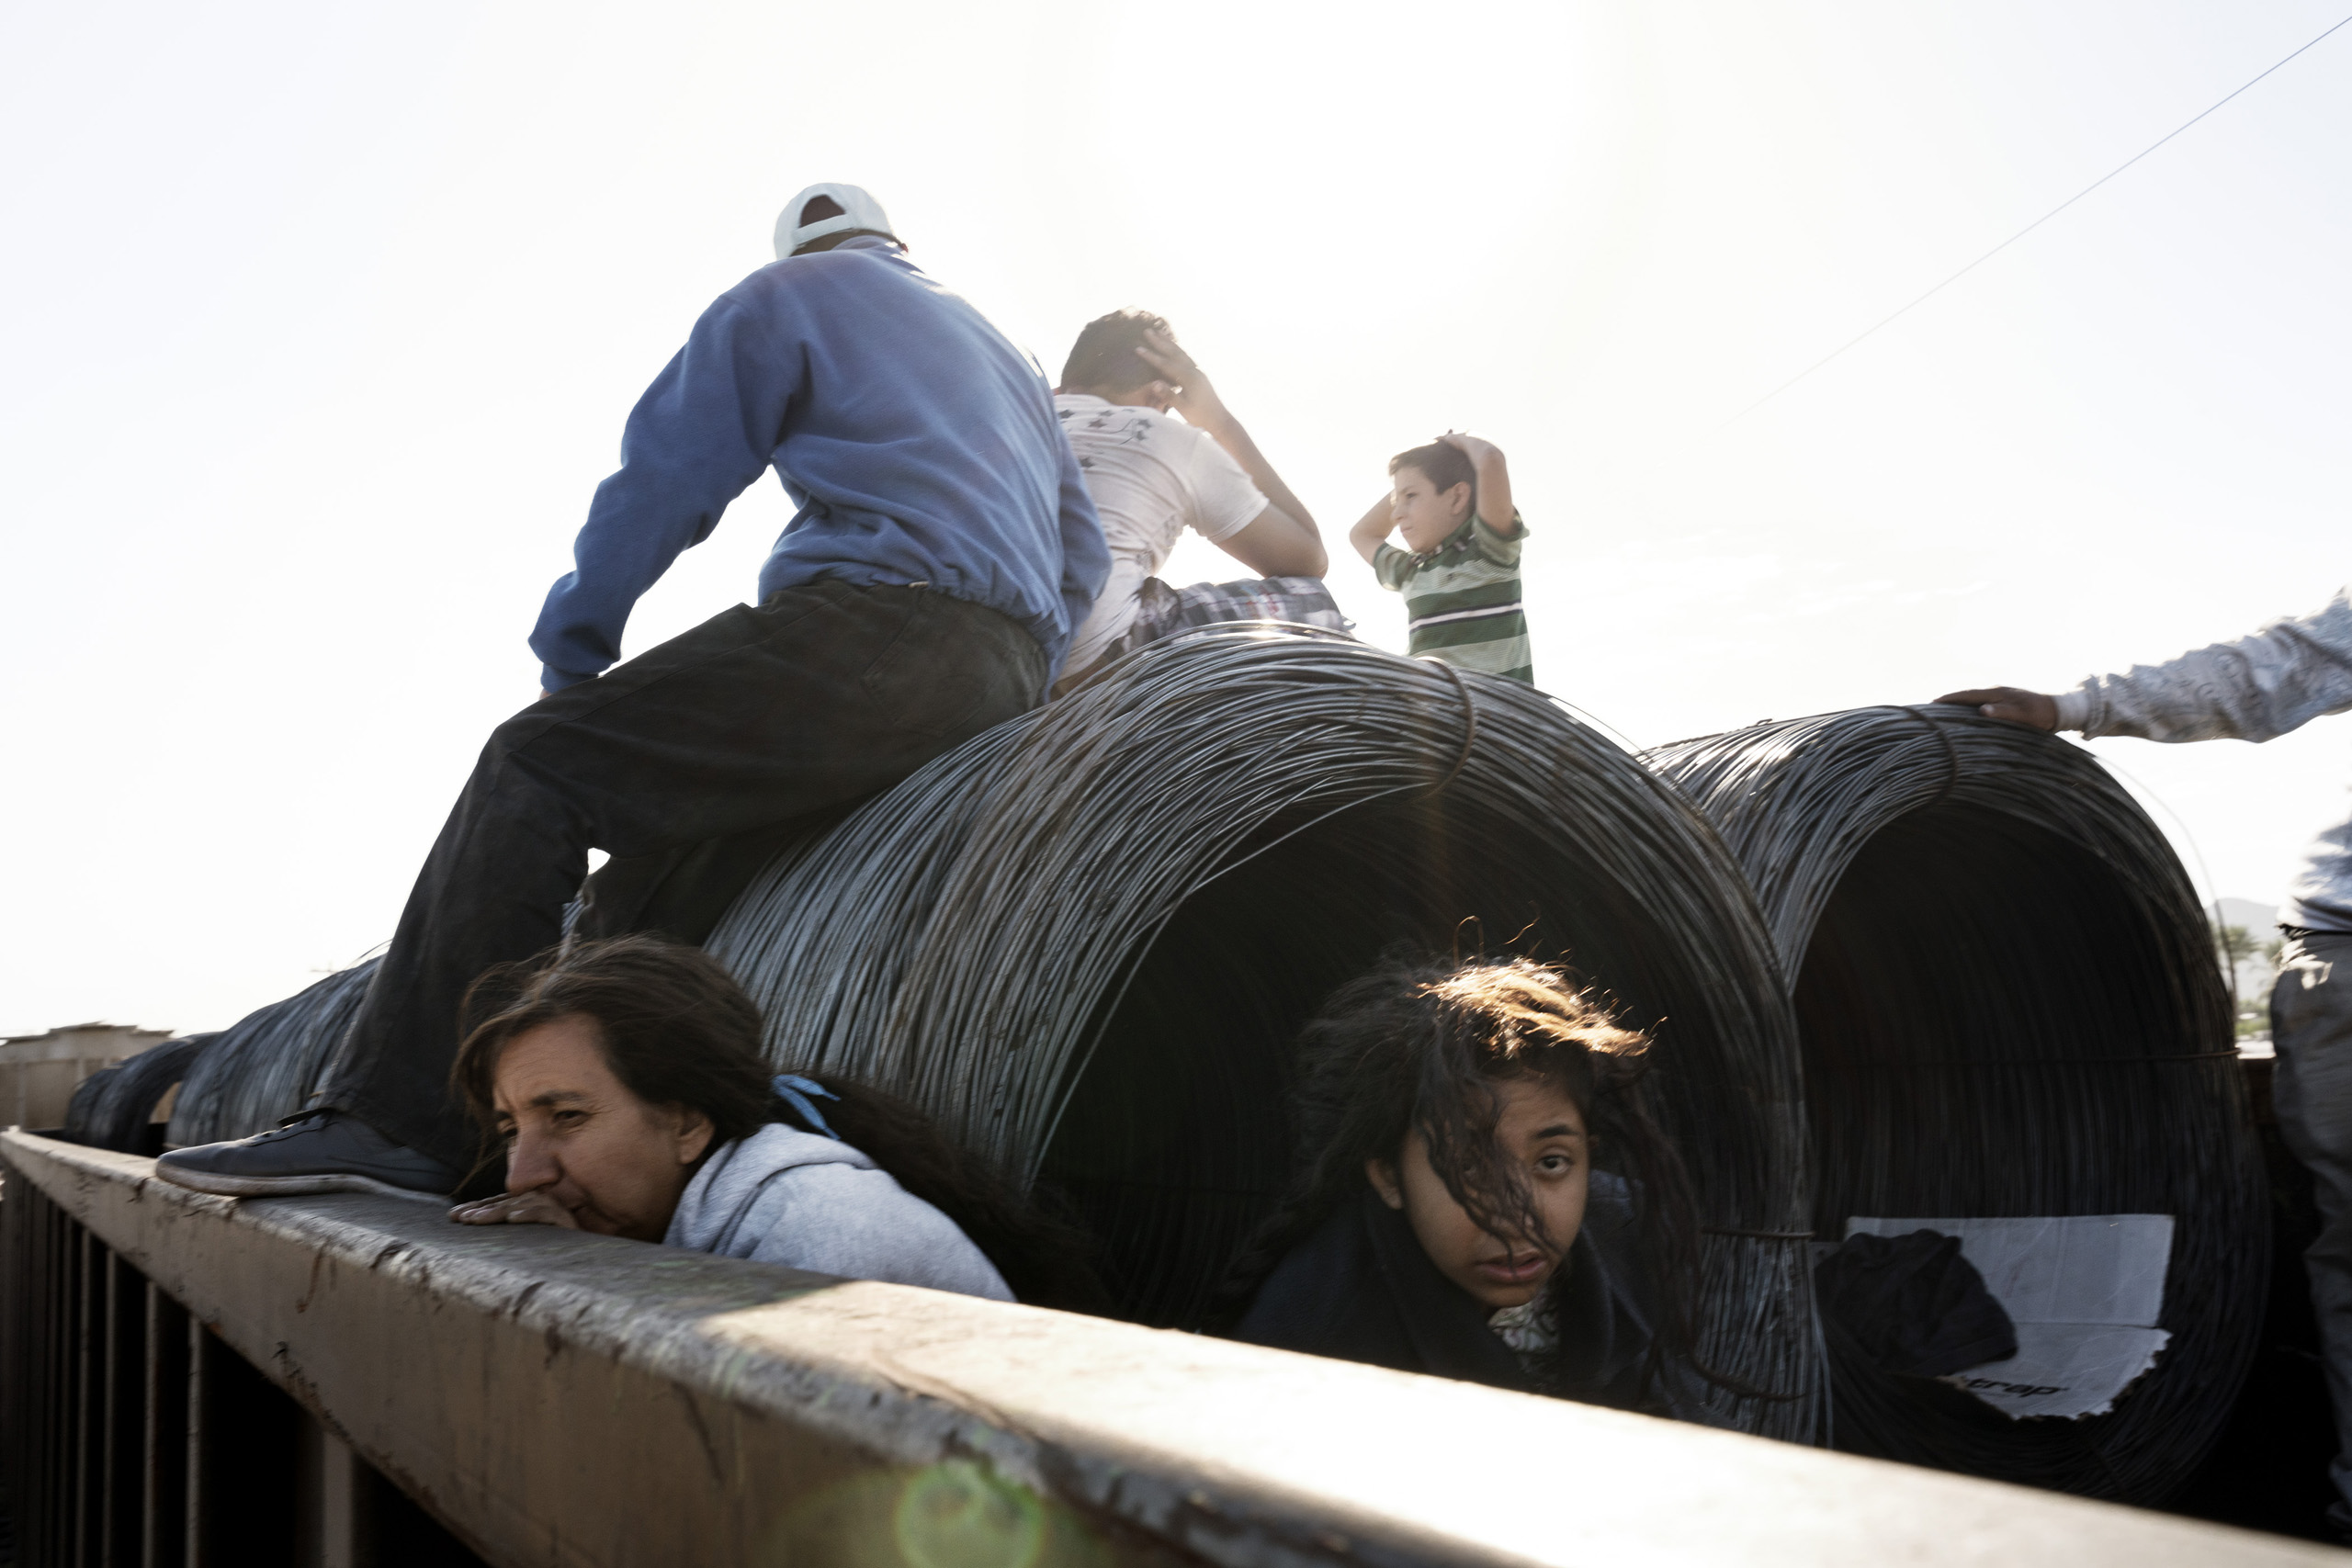 In the town of Caborca, a family of Central American illegal migrants has climbed onto a freight train headed north to the U.S. Sonora, Mexico. Oct. 22, 2016.